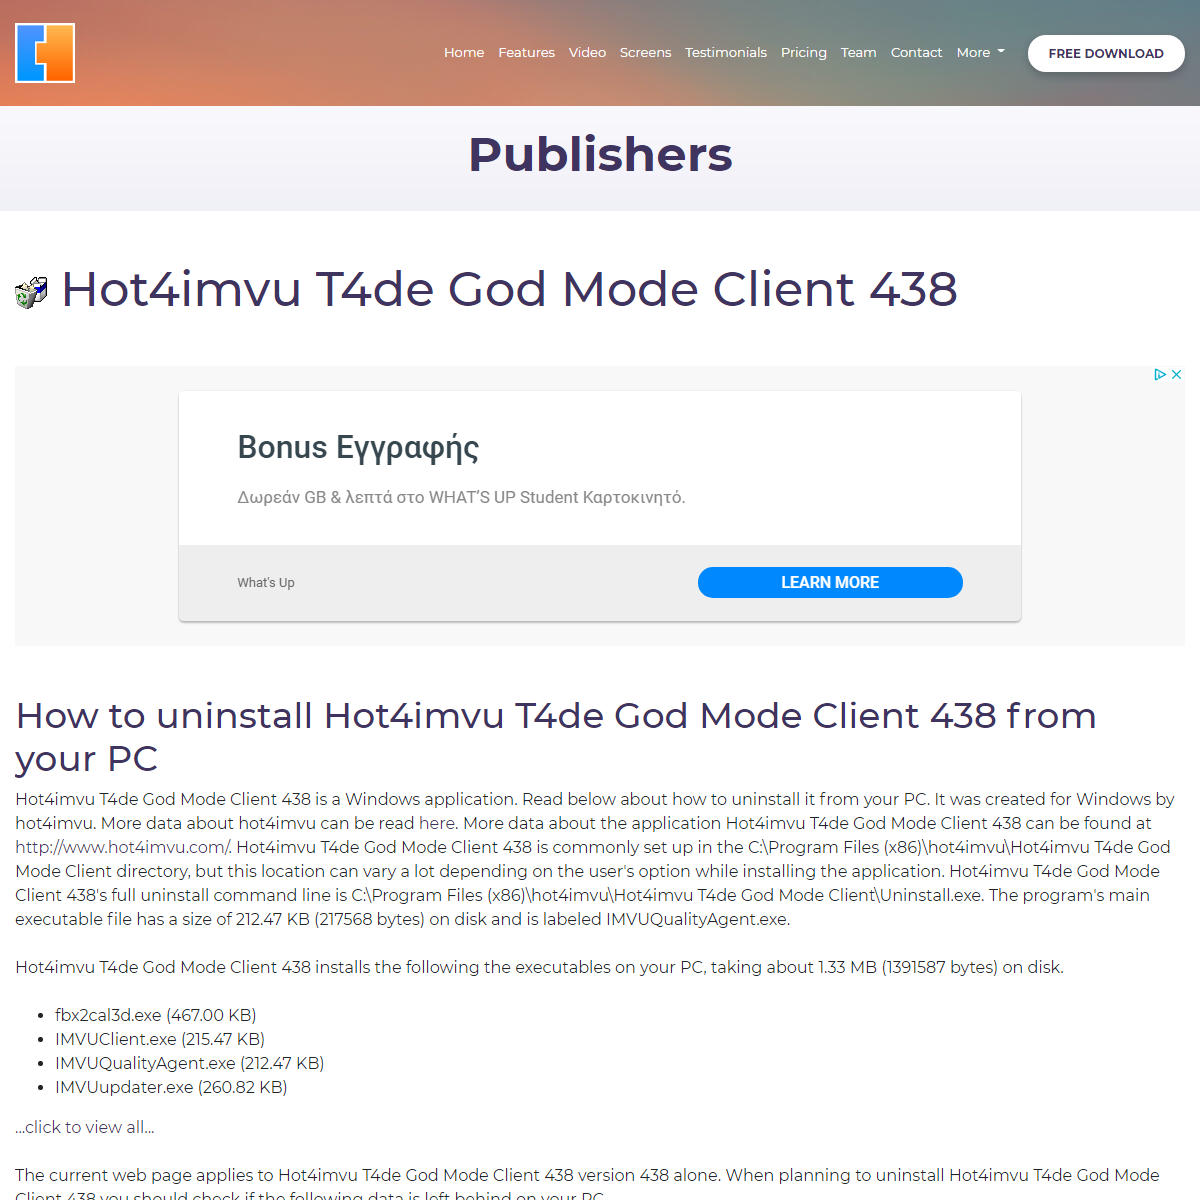 A complete backup of https://www.advanceduninstaller.com/Hot4imvu-T4de-God-Mode-Client-438-48d5f3f0a982d666e751ab466a2efab3-appl